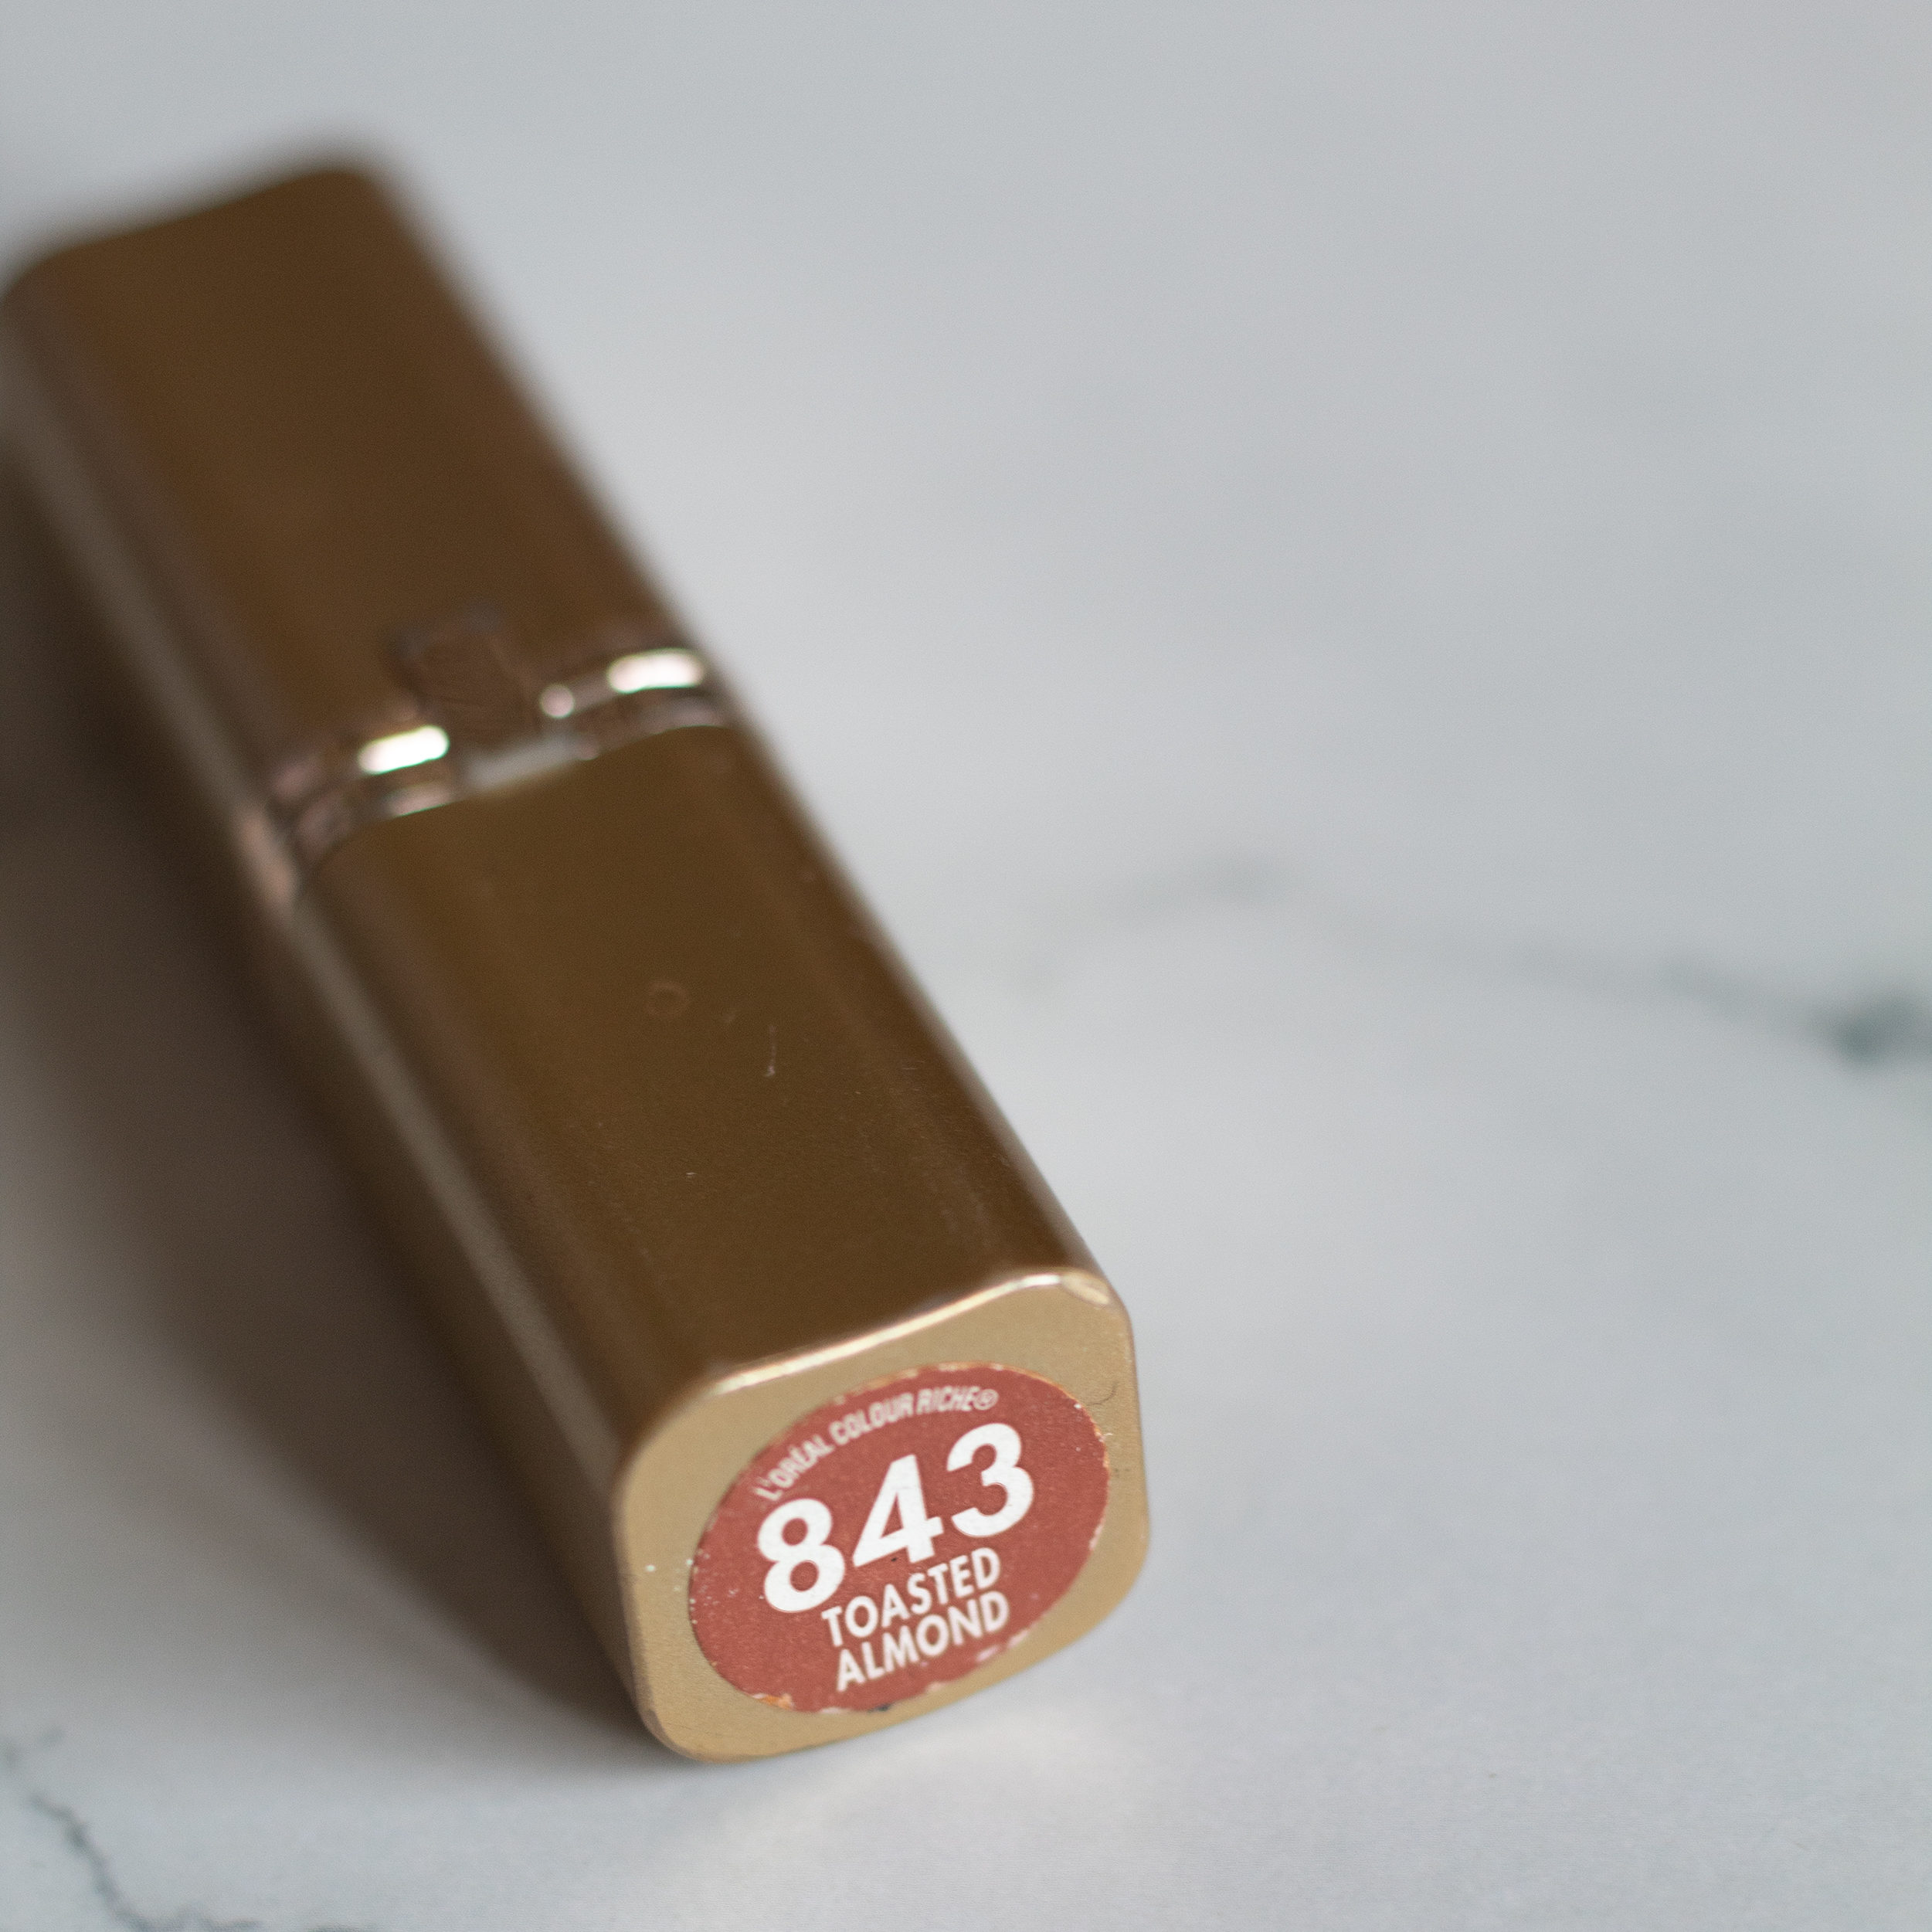 Gold lipstick case with the bottom showing and says 843 Toasted Almond